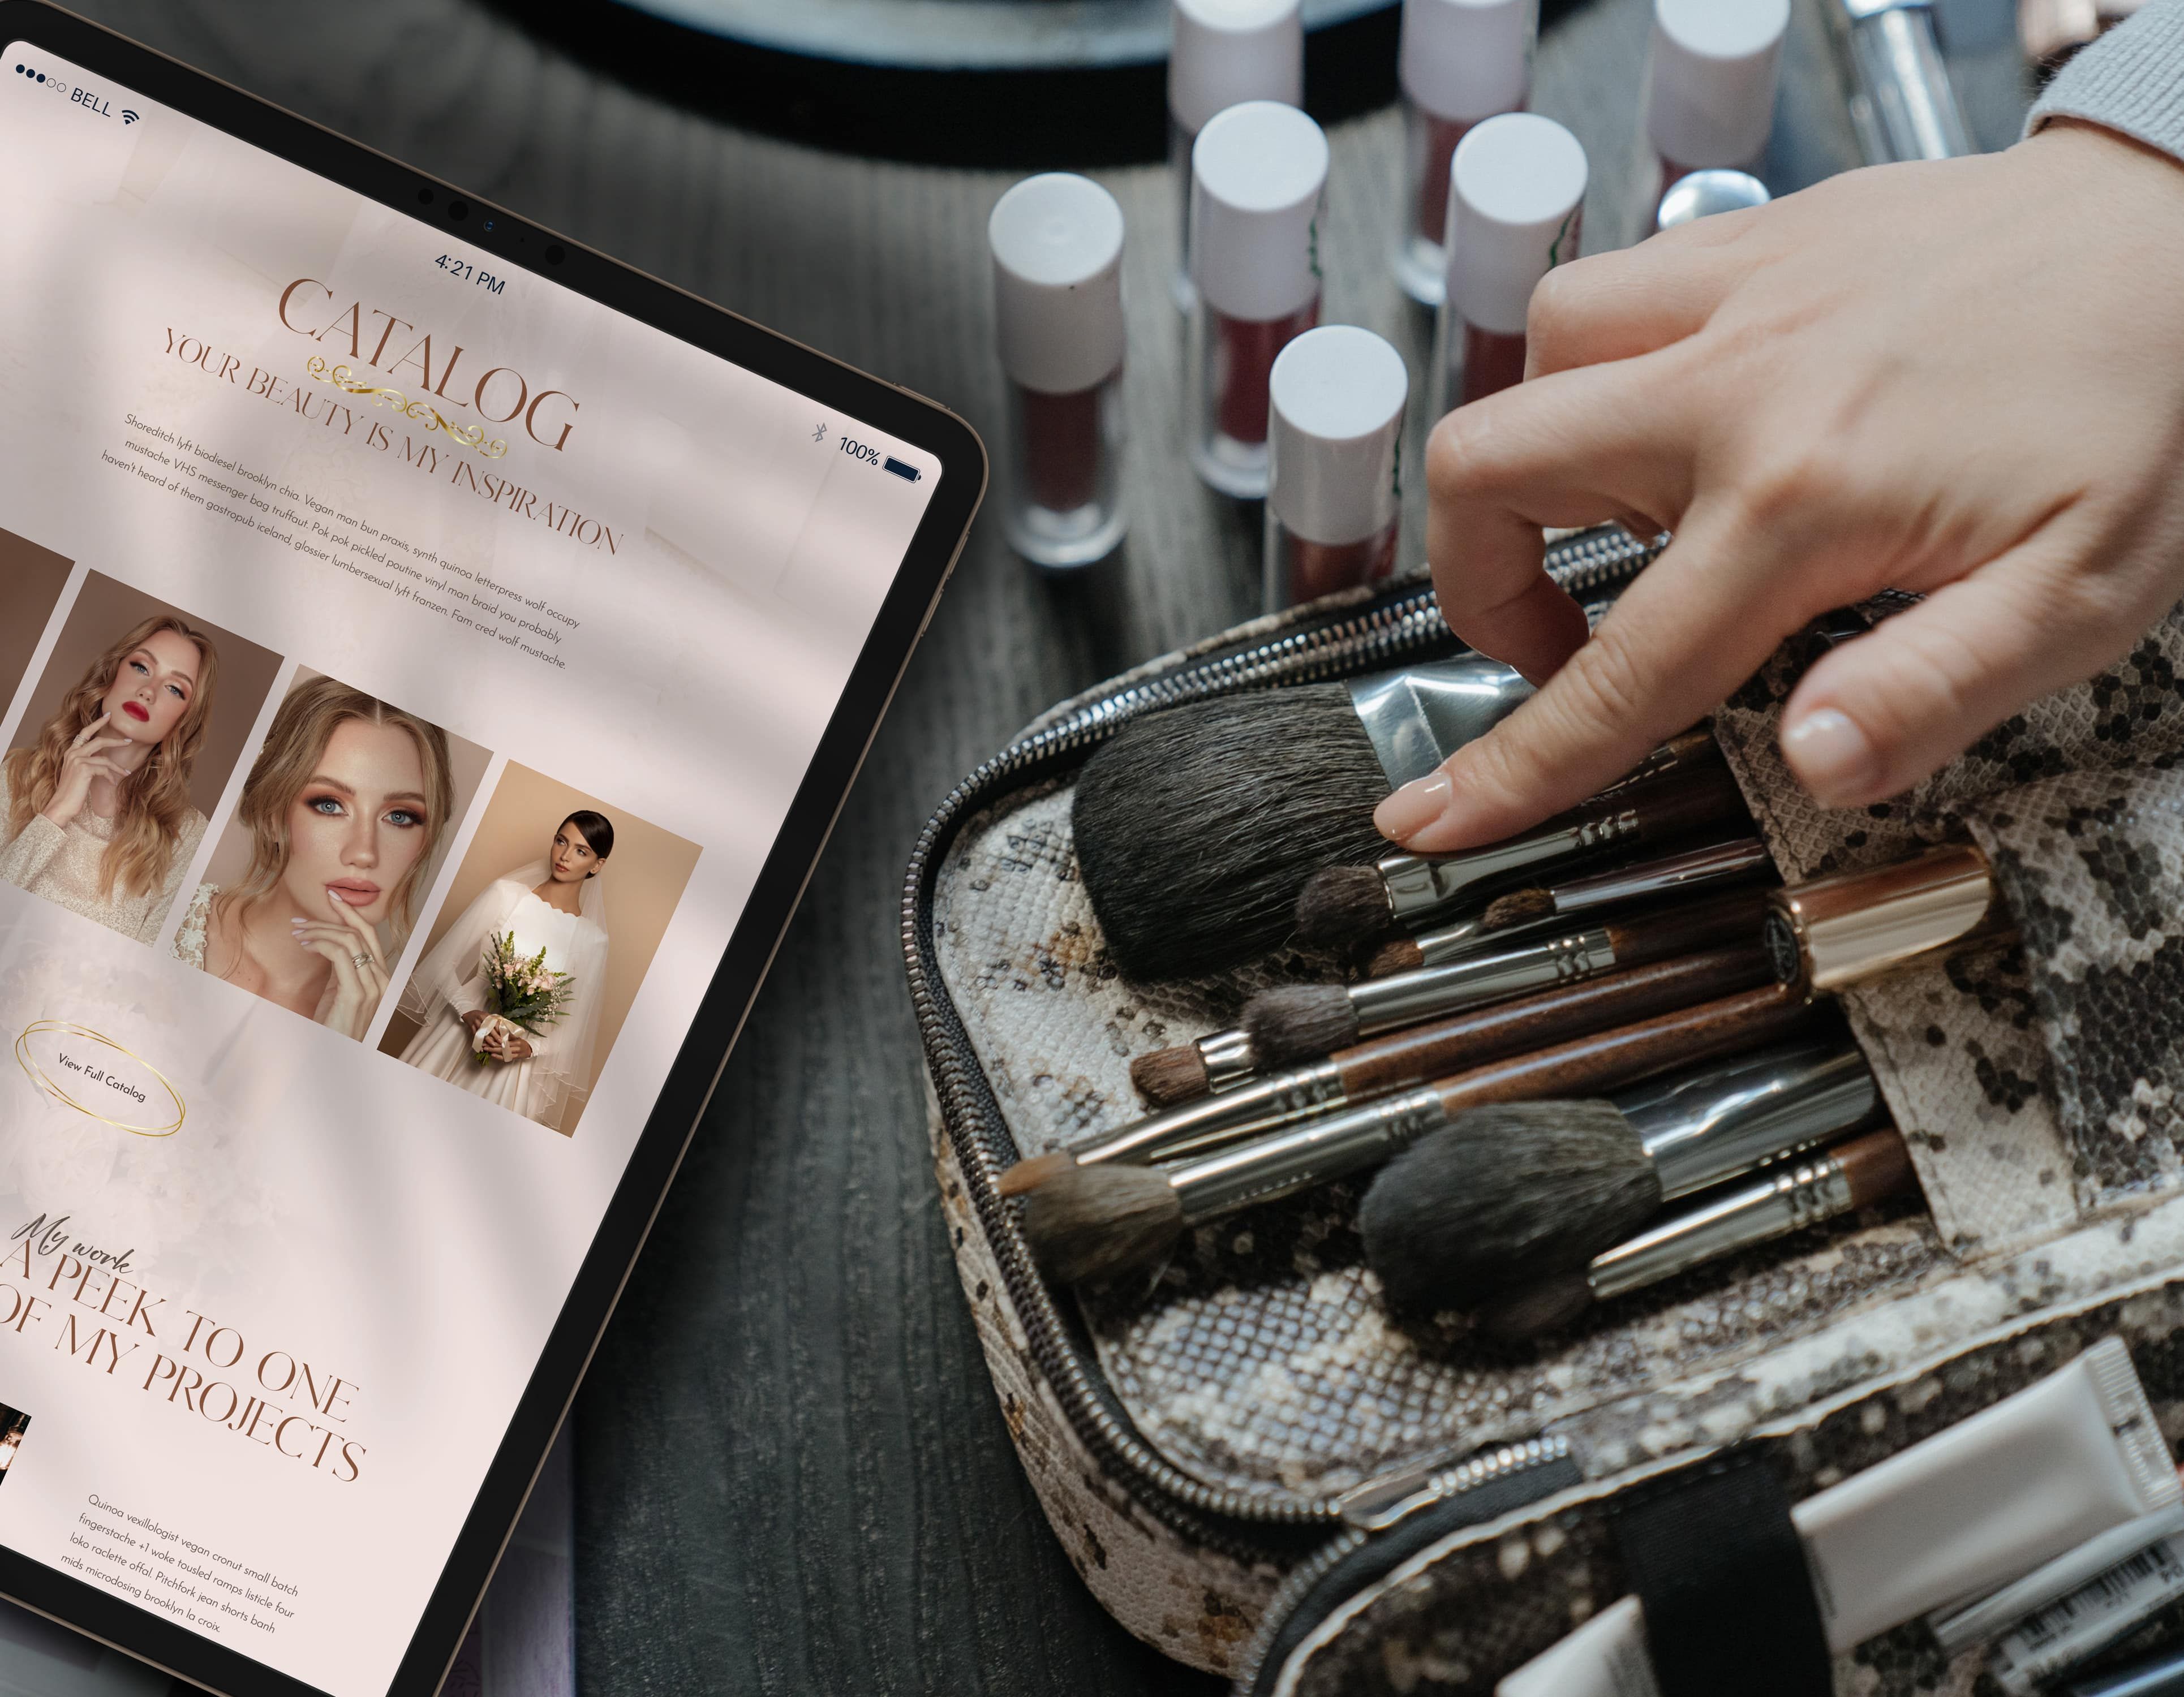 Tablet Catalogue View: Your beauty is my inspiration